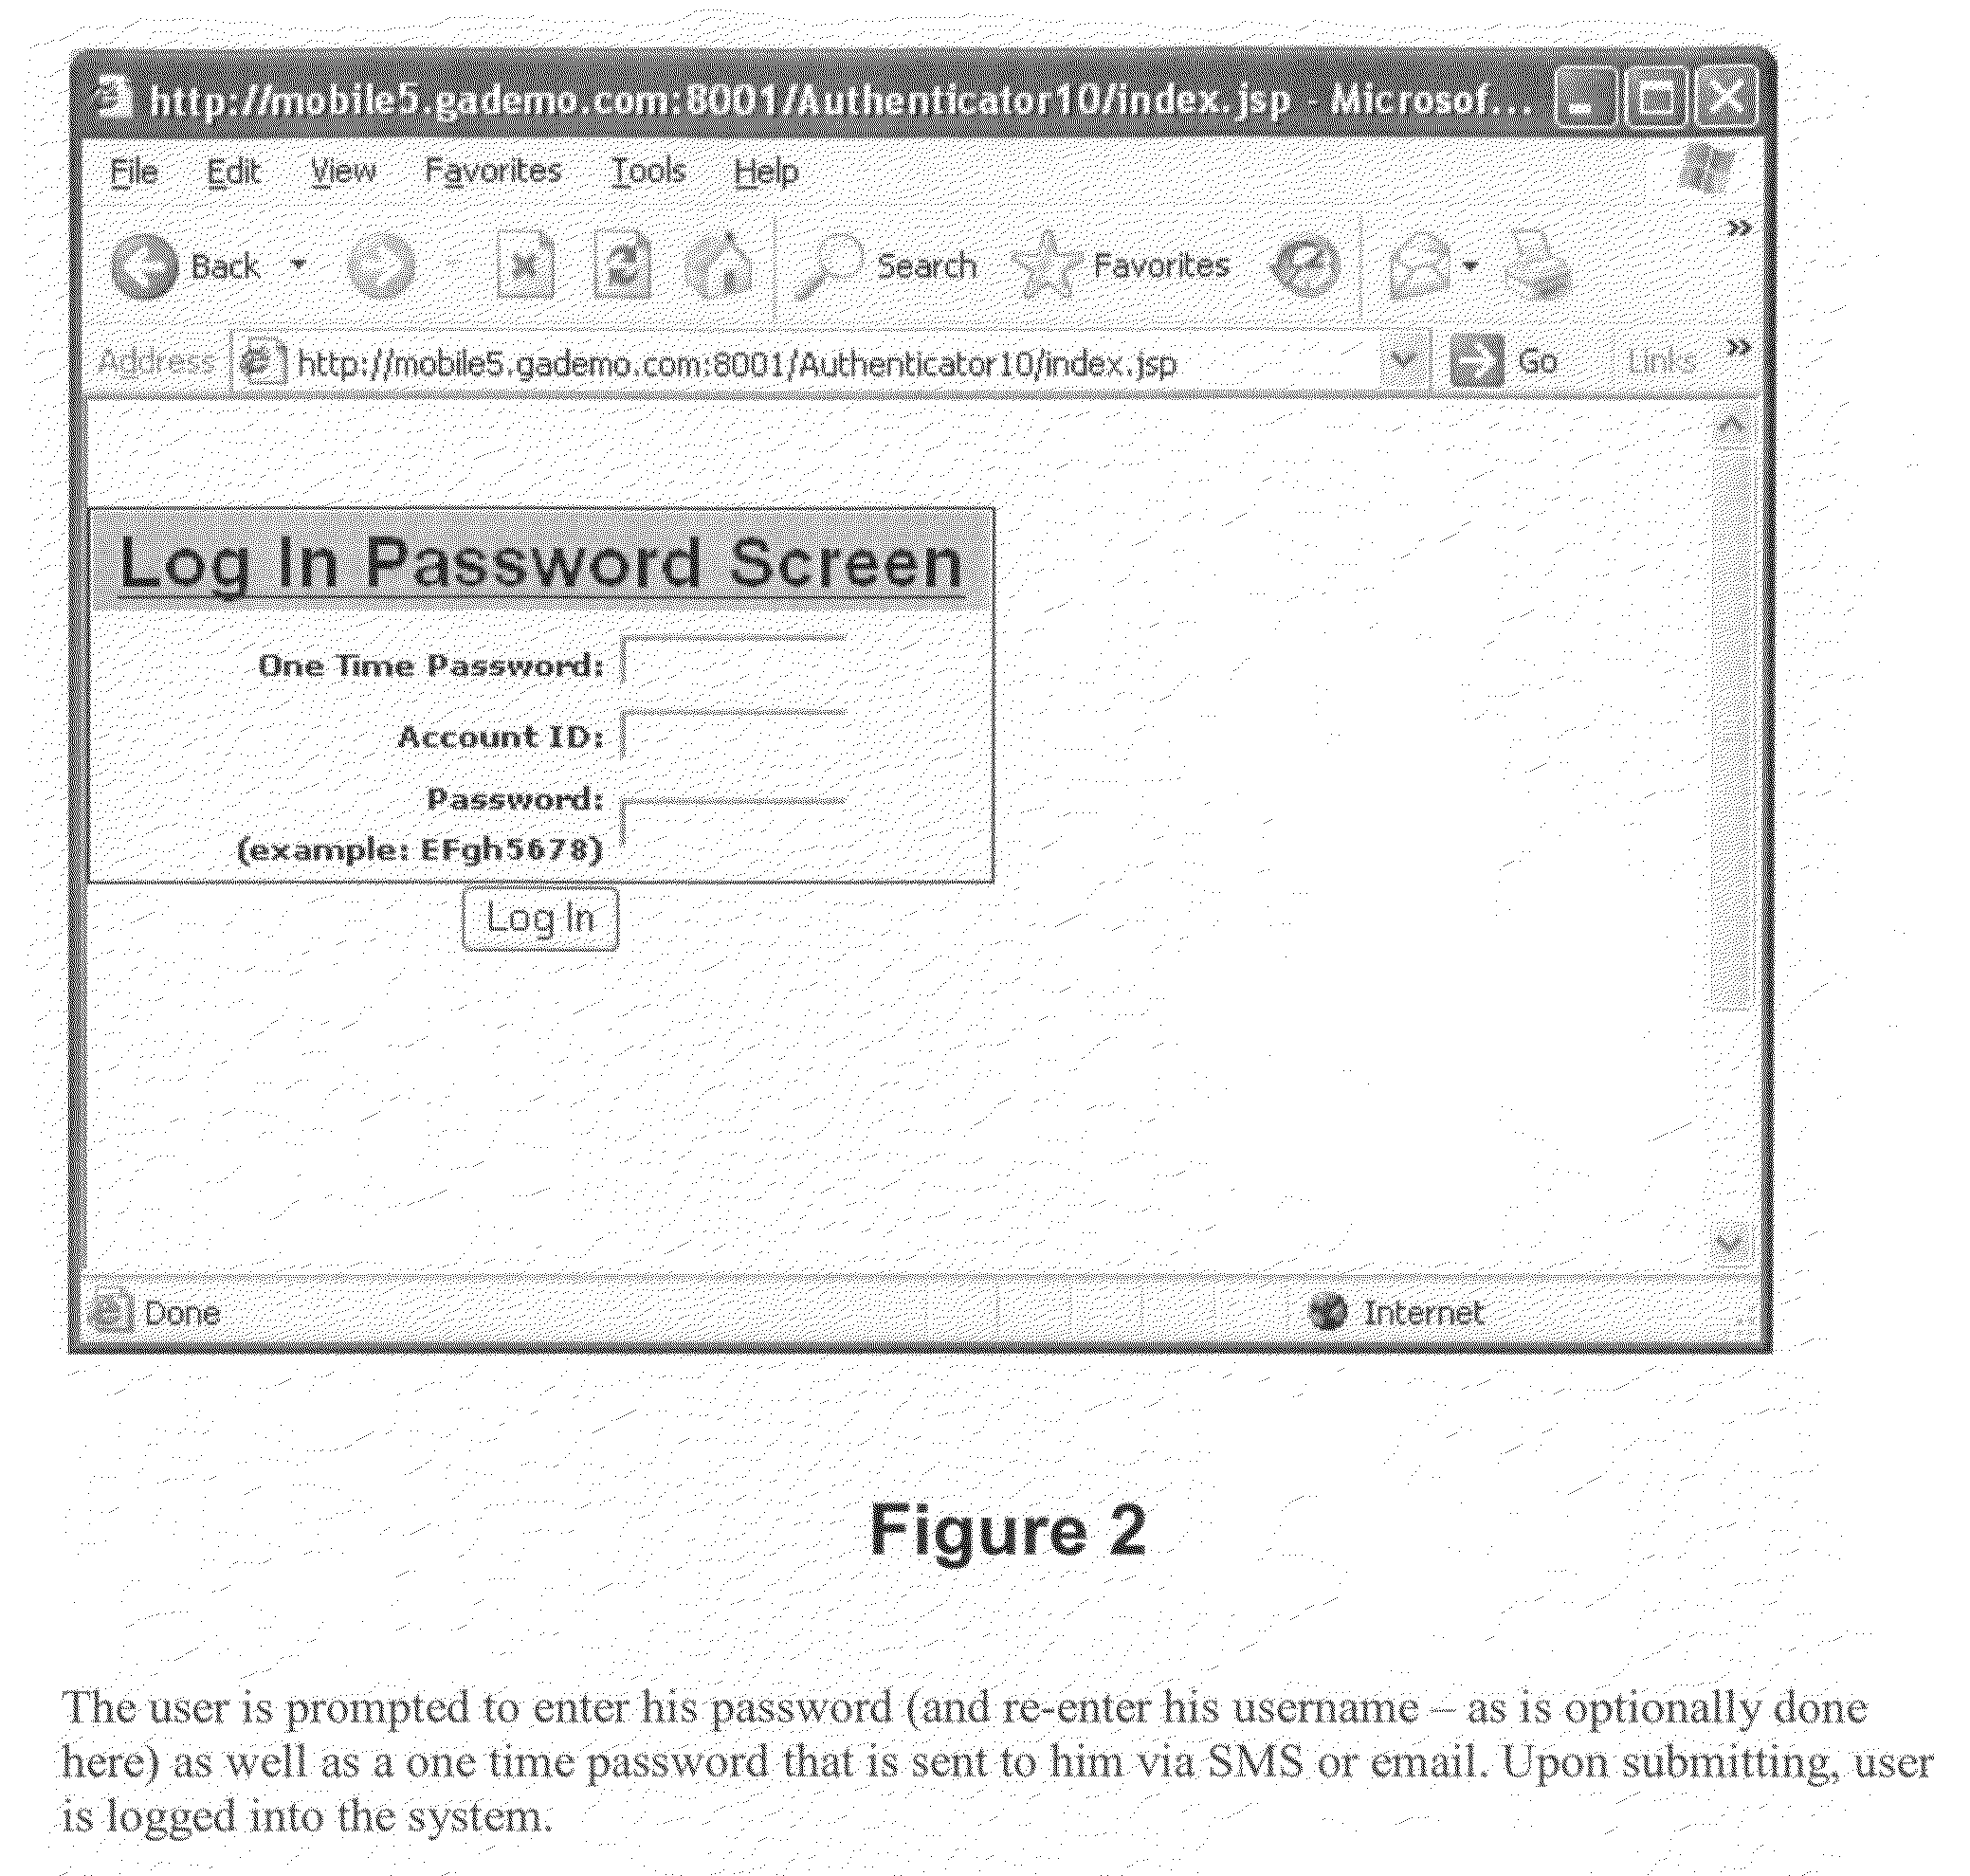 System and method for augmented user and site authentication from mobile devices